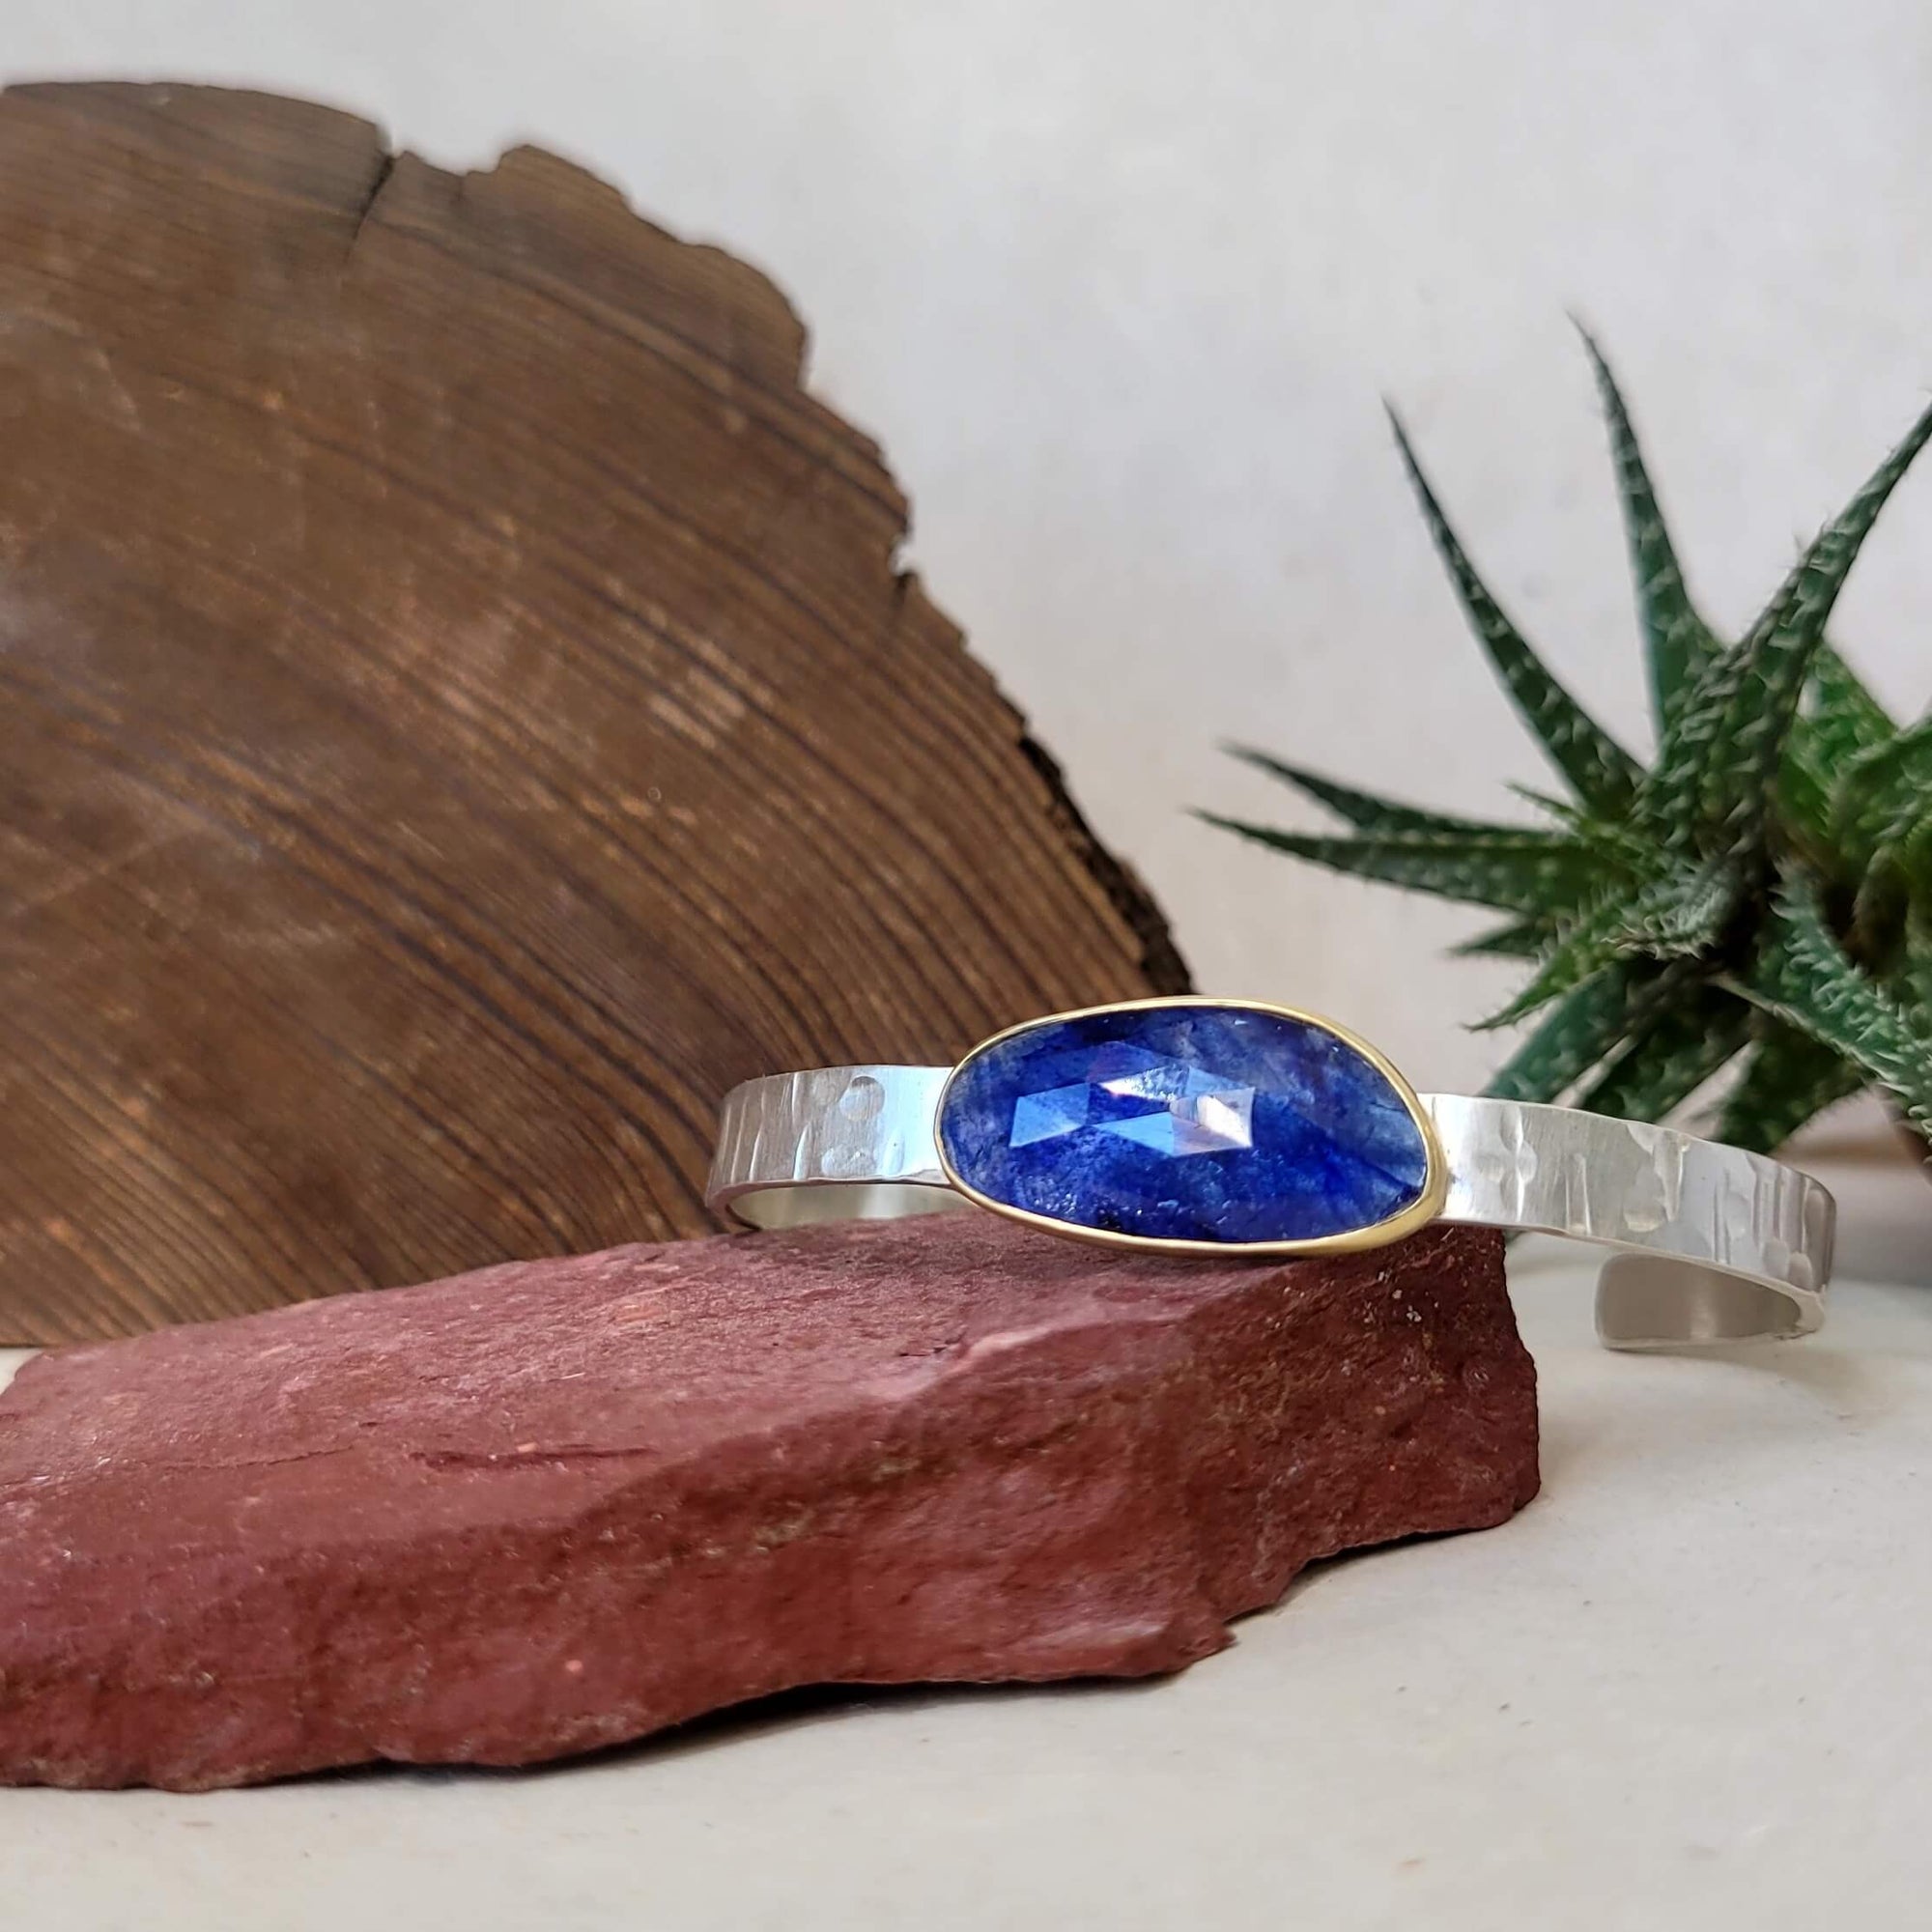 Organic shaped rose cut blue sapphire cuff with a yellow gold bezel on a hand hammered sterling silver cuff.